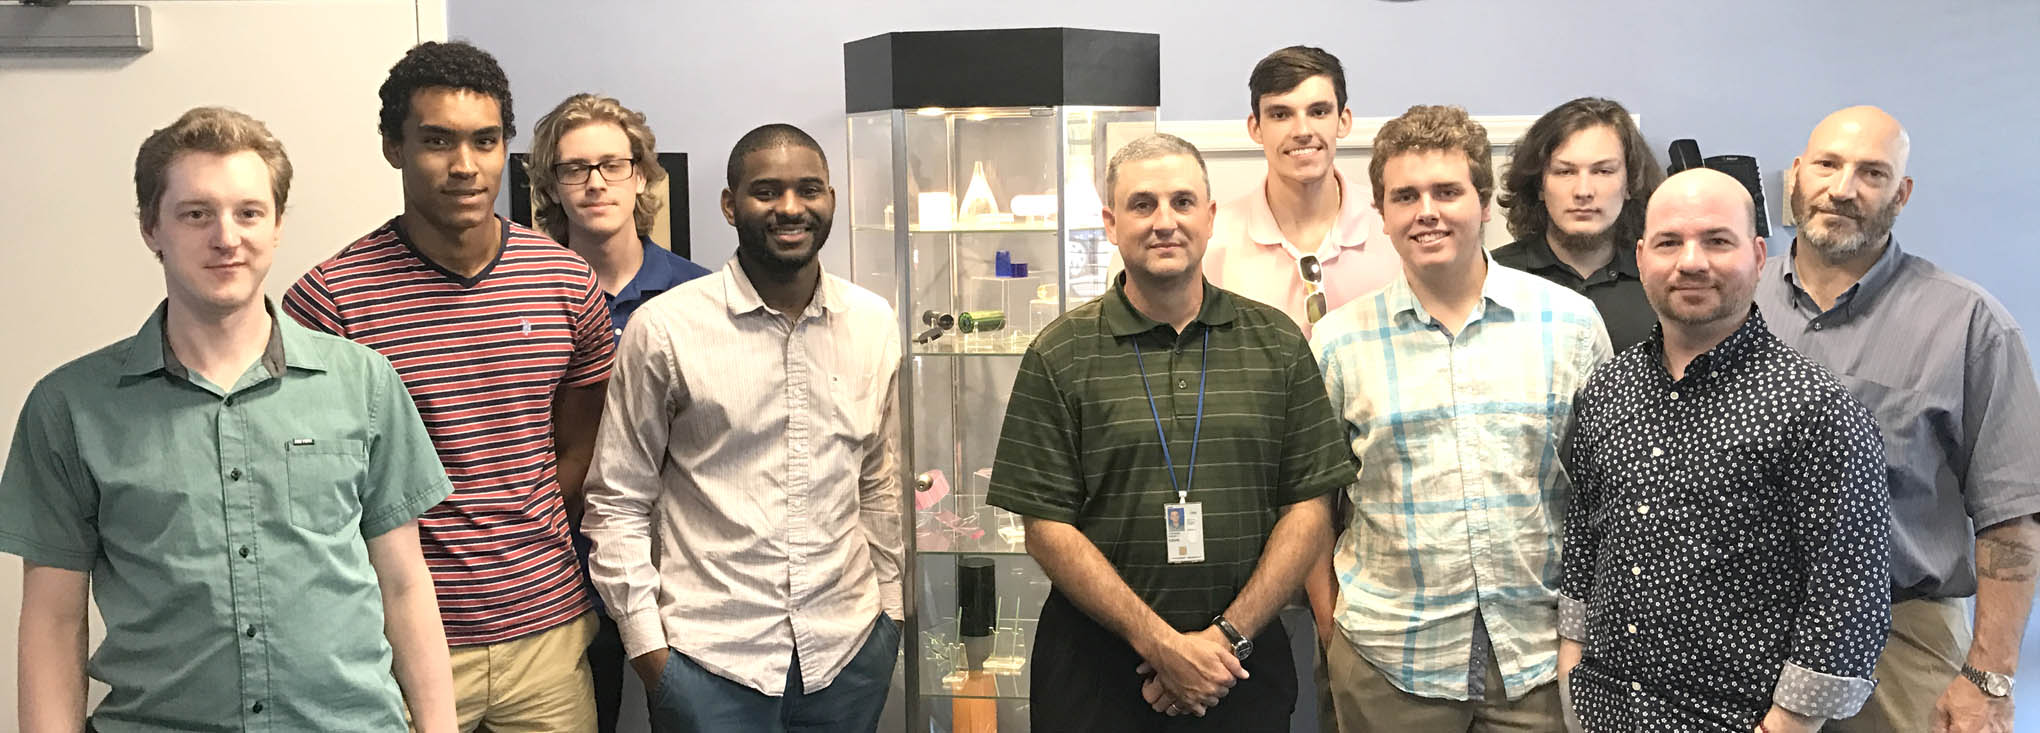 Click to enlarge,  Touring Synoptics, a division of Northrop Grumman, were, left to right: Michael Kropp, Brandon Pasley Disher, Seth Kuenzler, Jamal Robinson, Dr. Kevin Stevens (Director of Research &amp; Development at Synoptics, who is also an advisor to the CCCC LPT program), Cody Flowers, Derrick Kuhl, Darin Anderson, Nickolas Jorgenson, and Richard Dickens. 